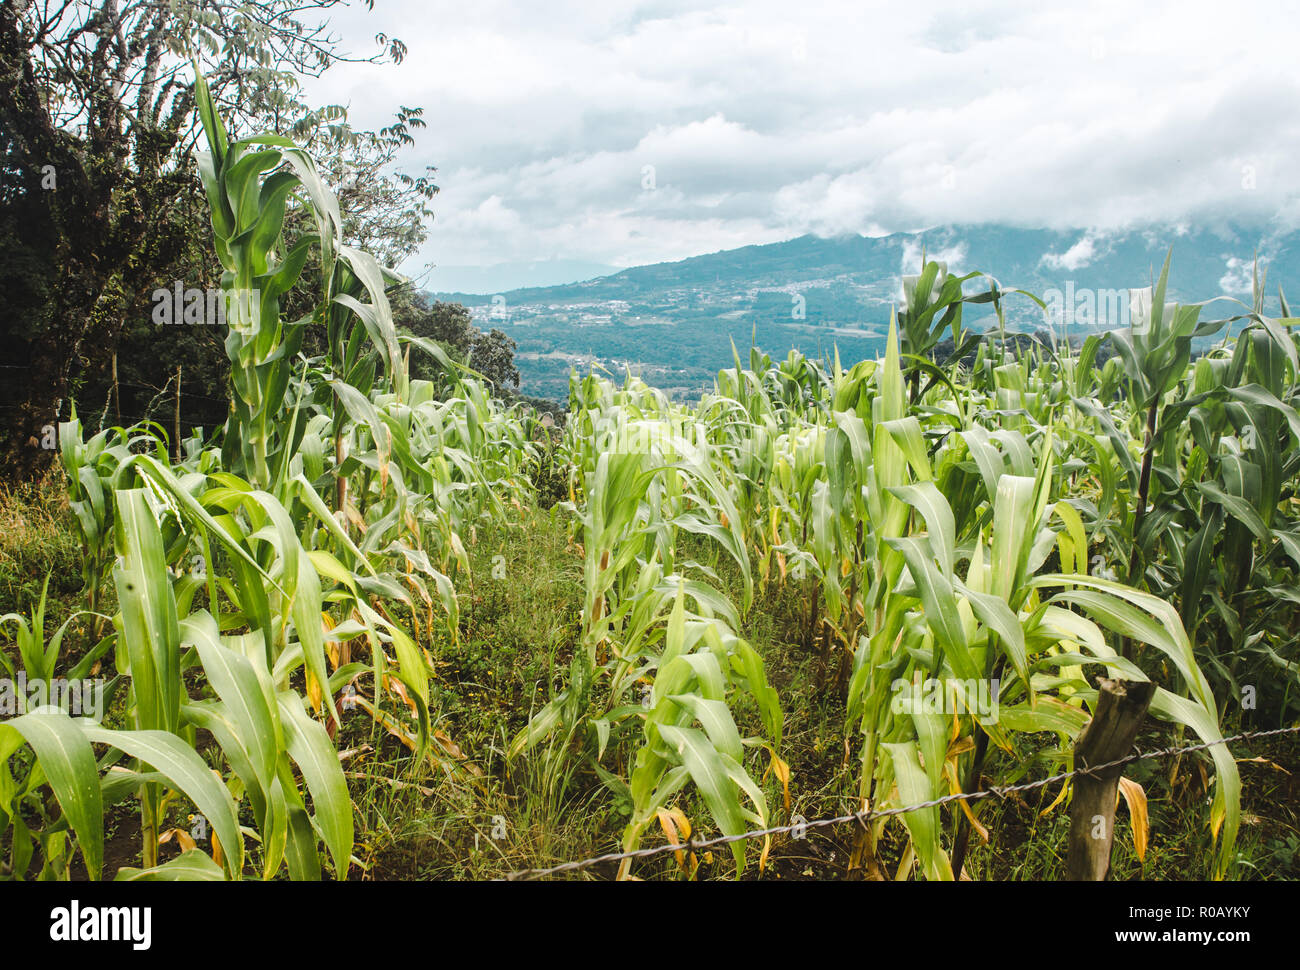 A field growing maize with views over the green hilly landscape worked into small farms in the rural mountains of Guatemala Stock Photo